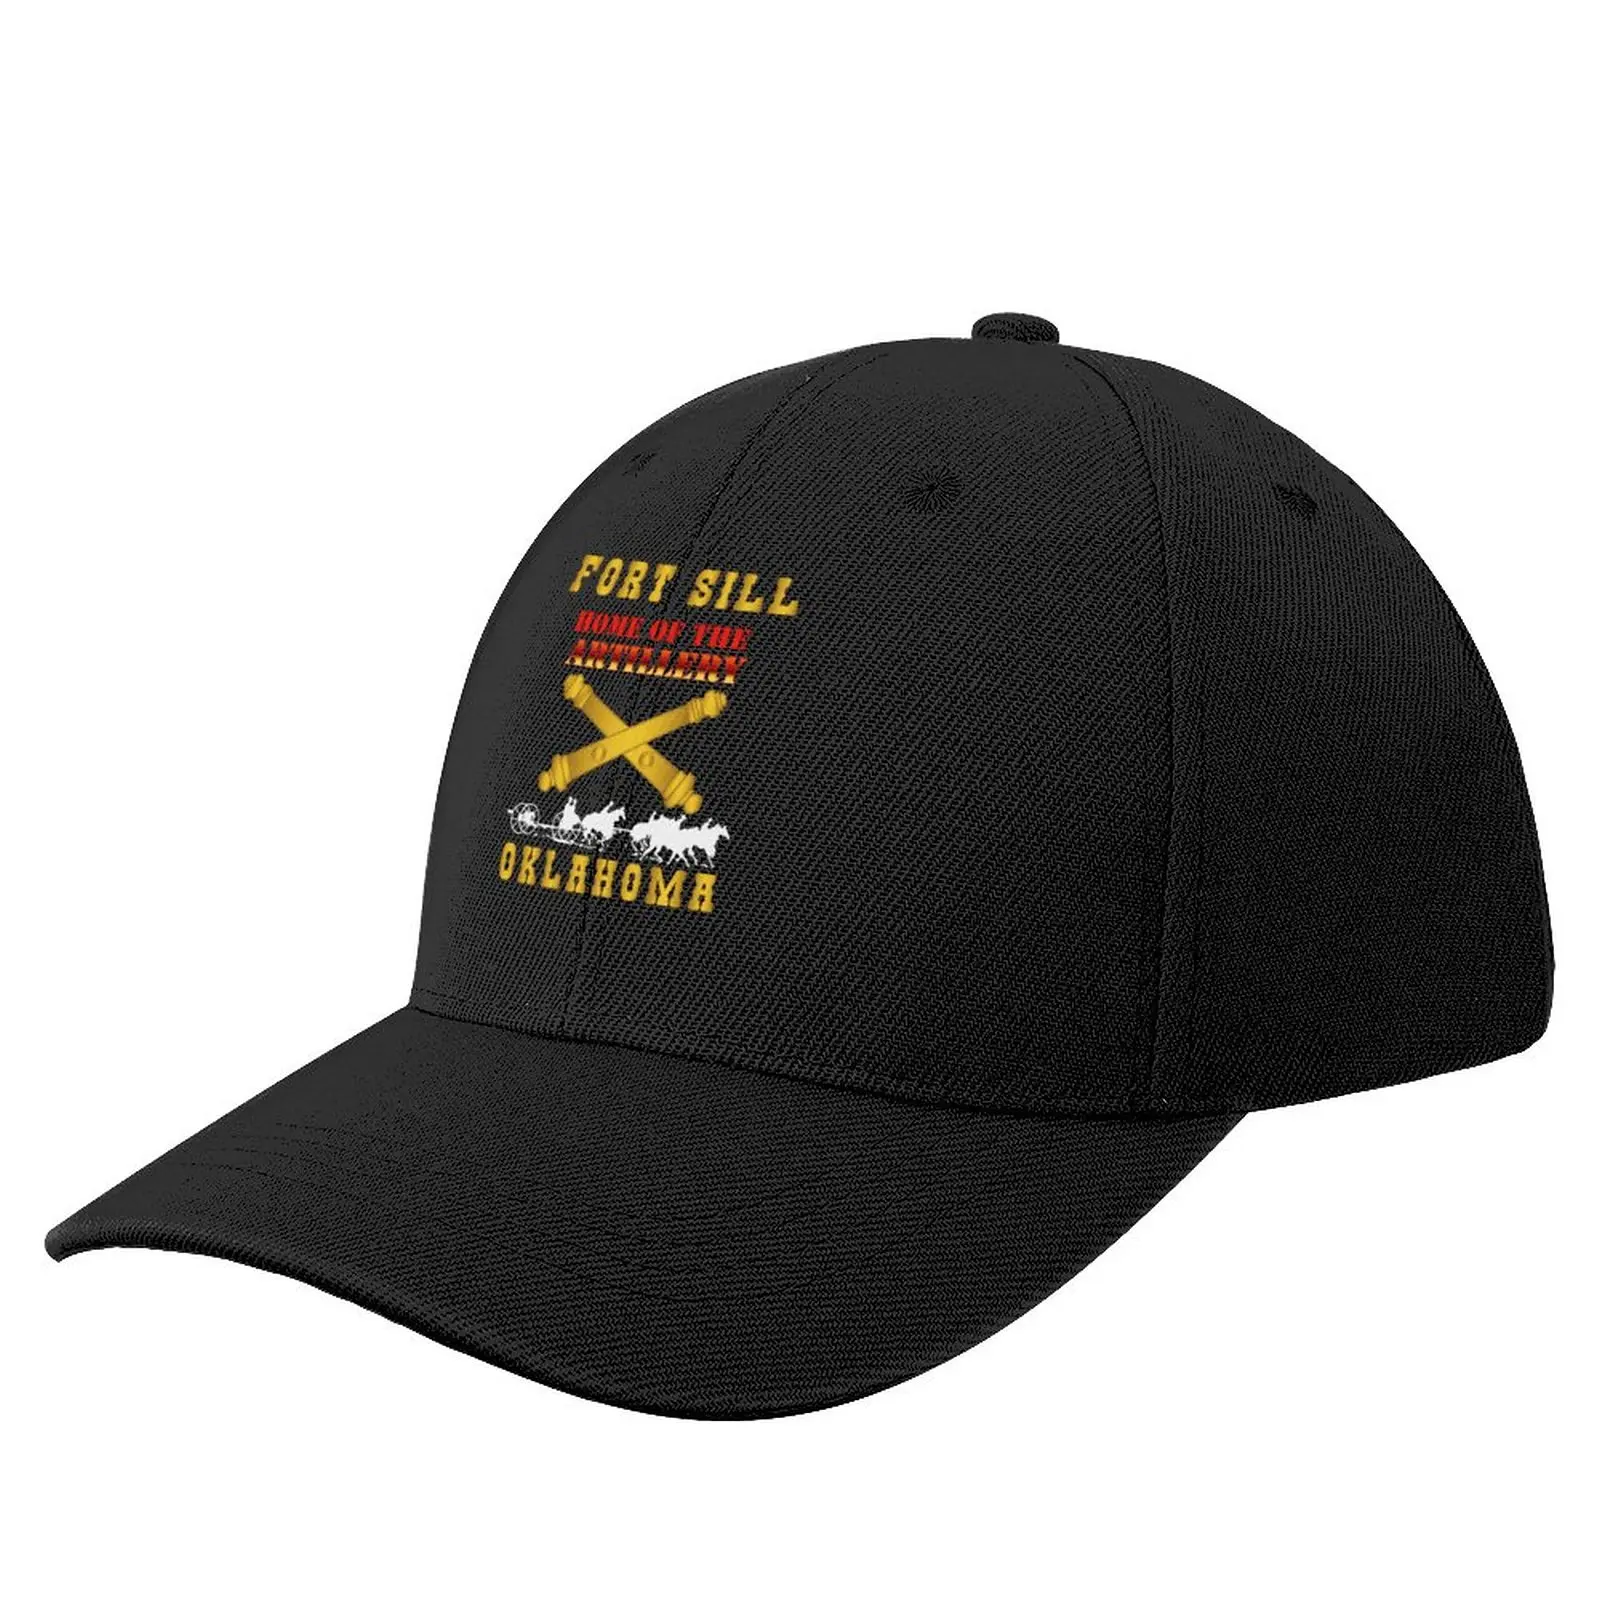 

Army - Fort SIll, Home of Artillery w Cassion - Gold X 300 Baseball Cap Caps Horse Hat birthday Mens Cap Women's